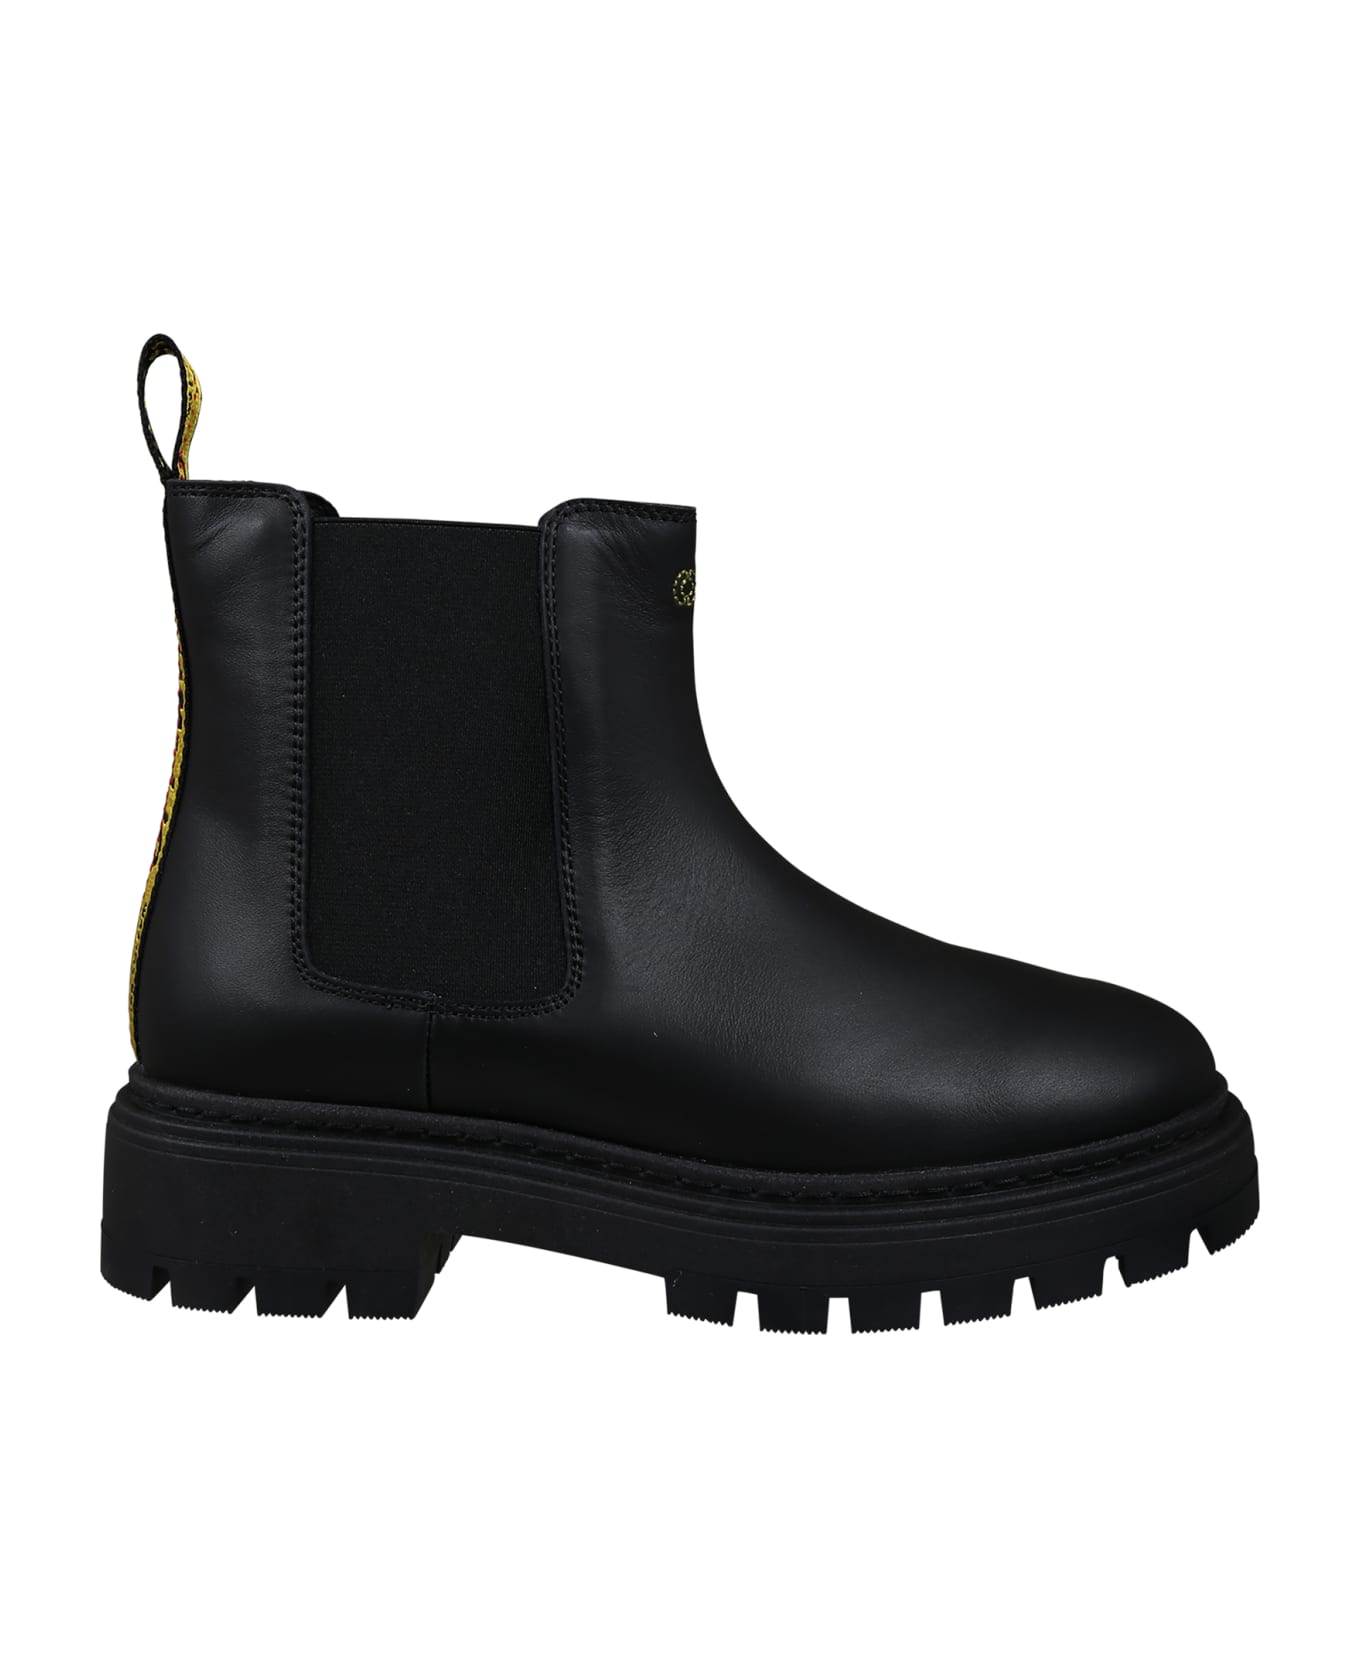 Off-White Black Ankle Boots For Kids With Logo - Black シューズ